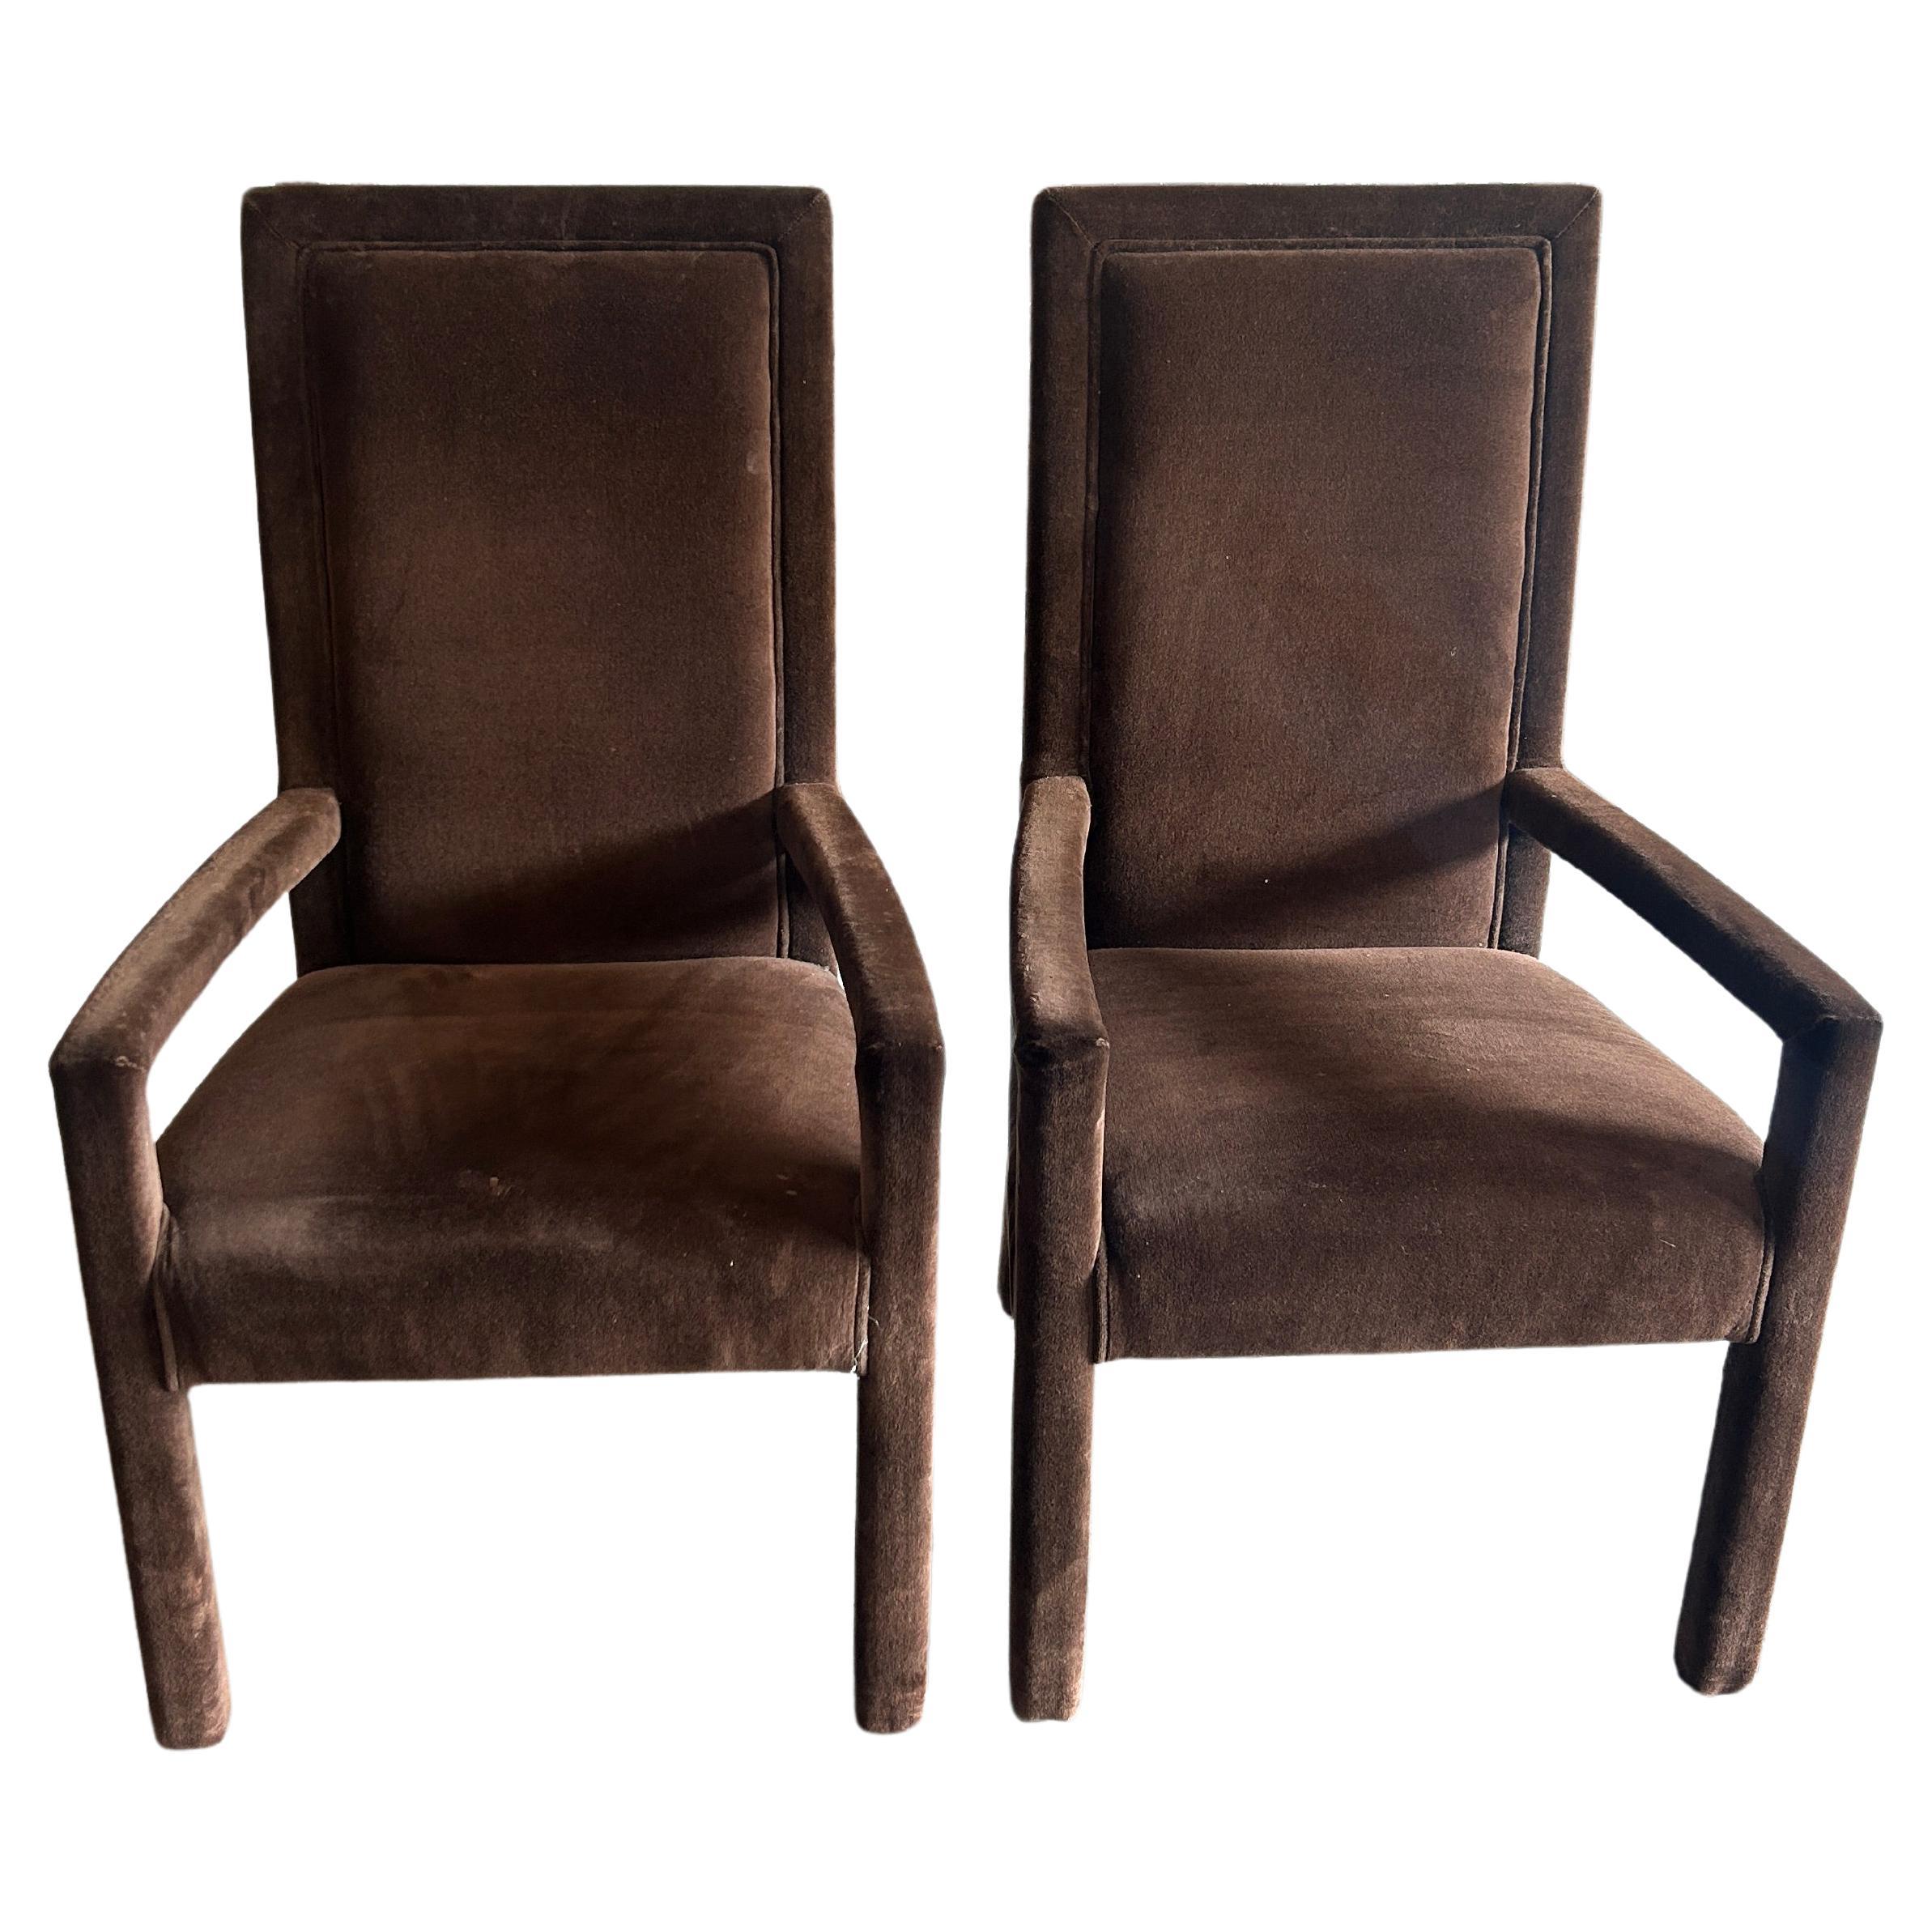 Pair of Milo baughman fully upholstered velvet parsons dining arm chairs